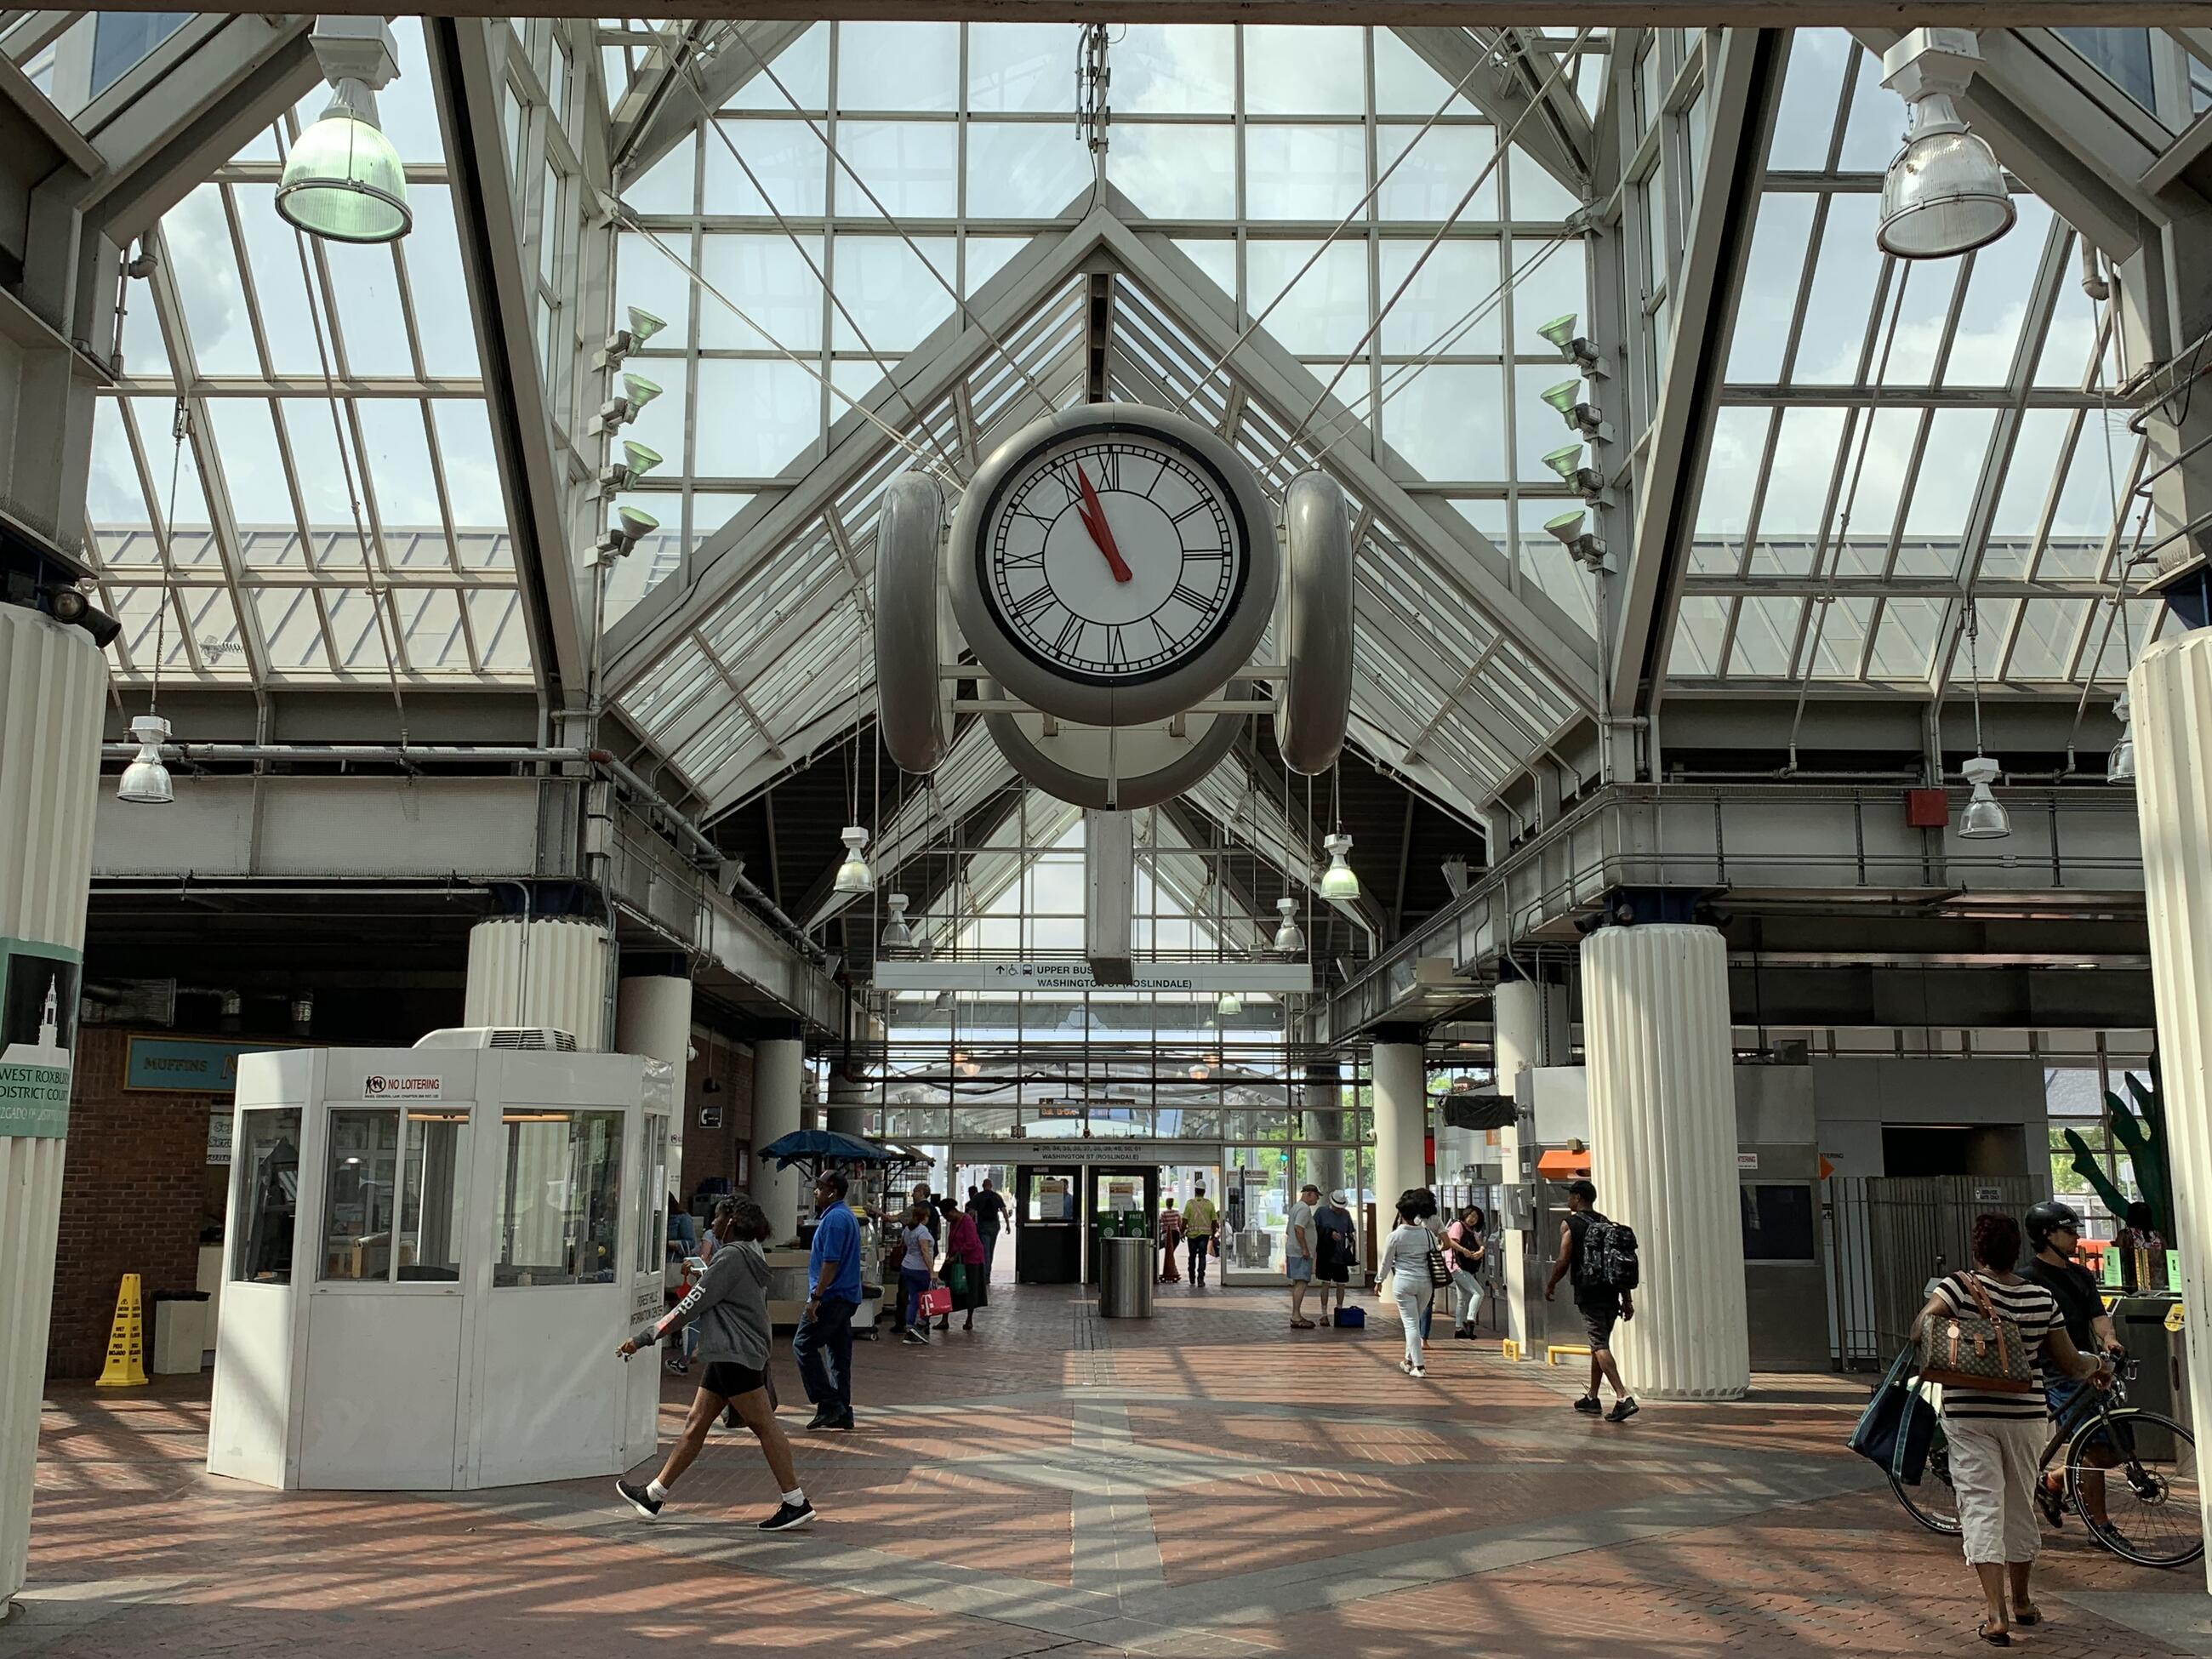 A photo of the interior of Forest Hills station, showing the clock and facing towards the upper busway. Many people are walking through the station.